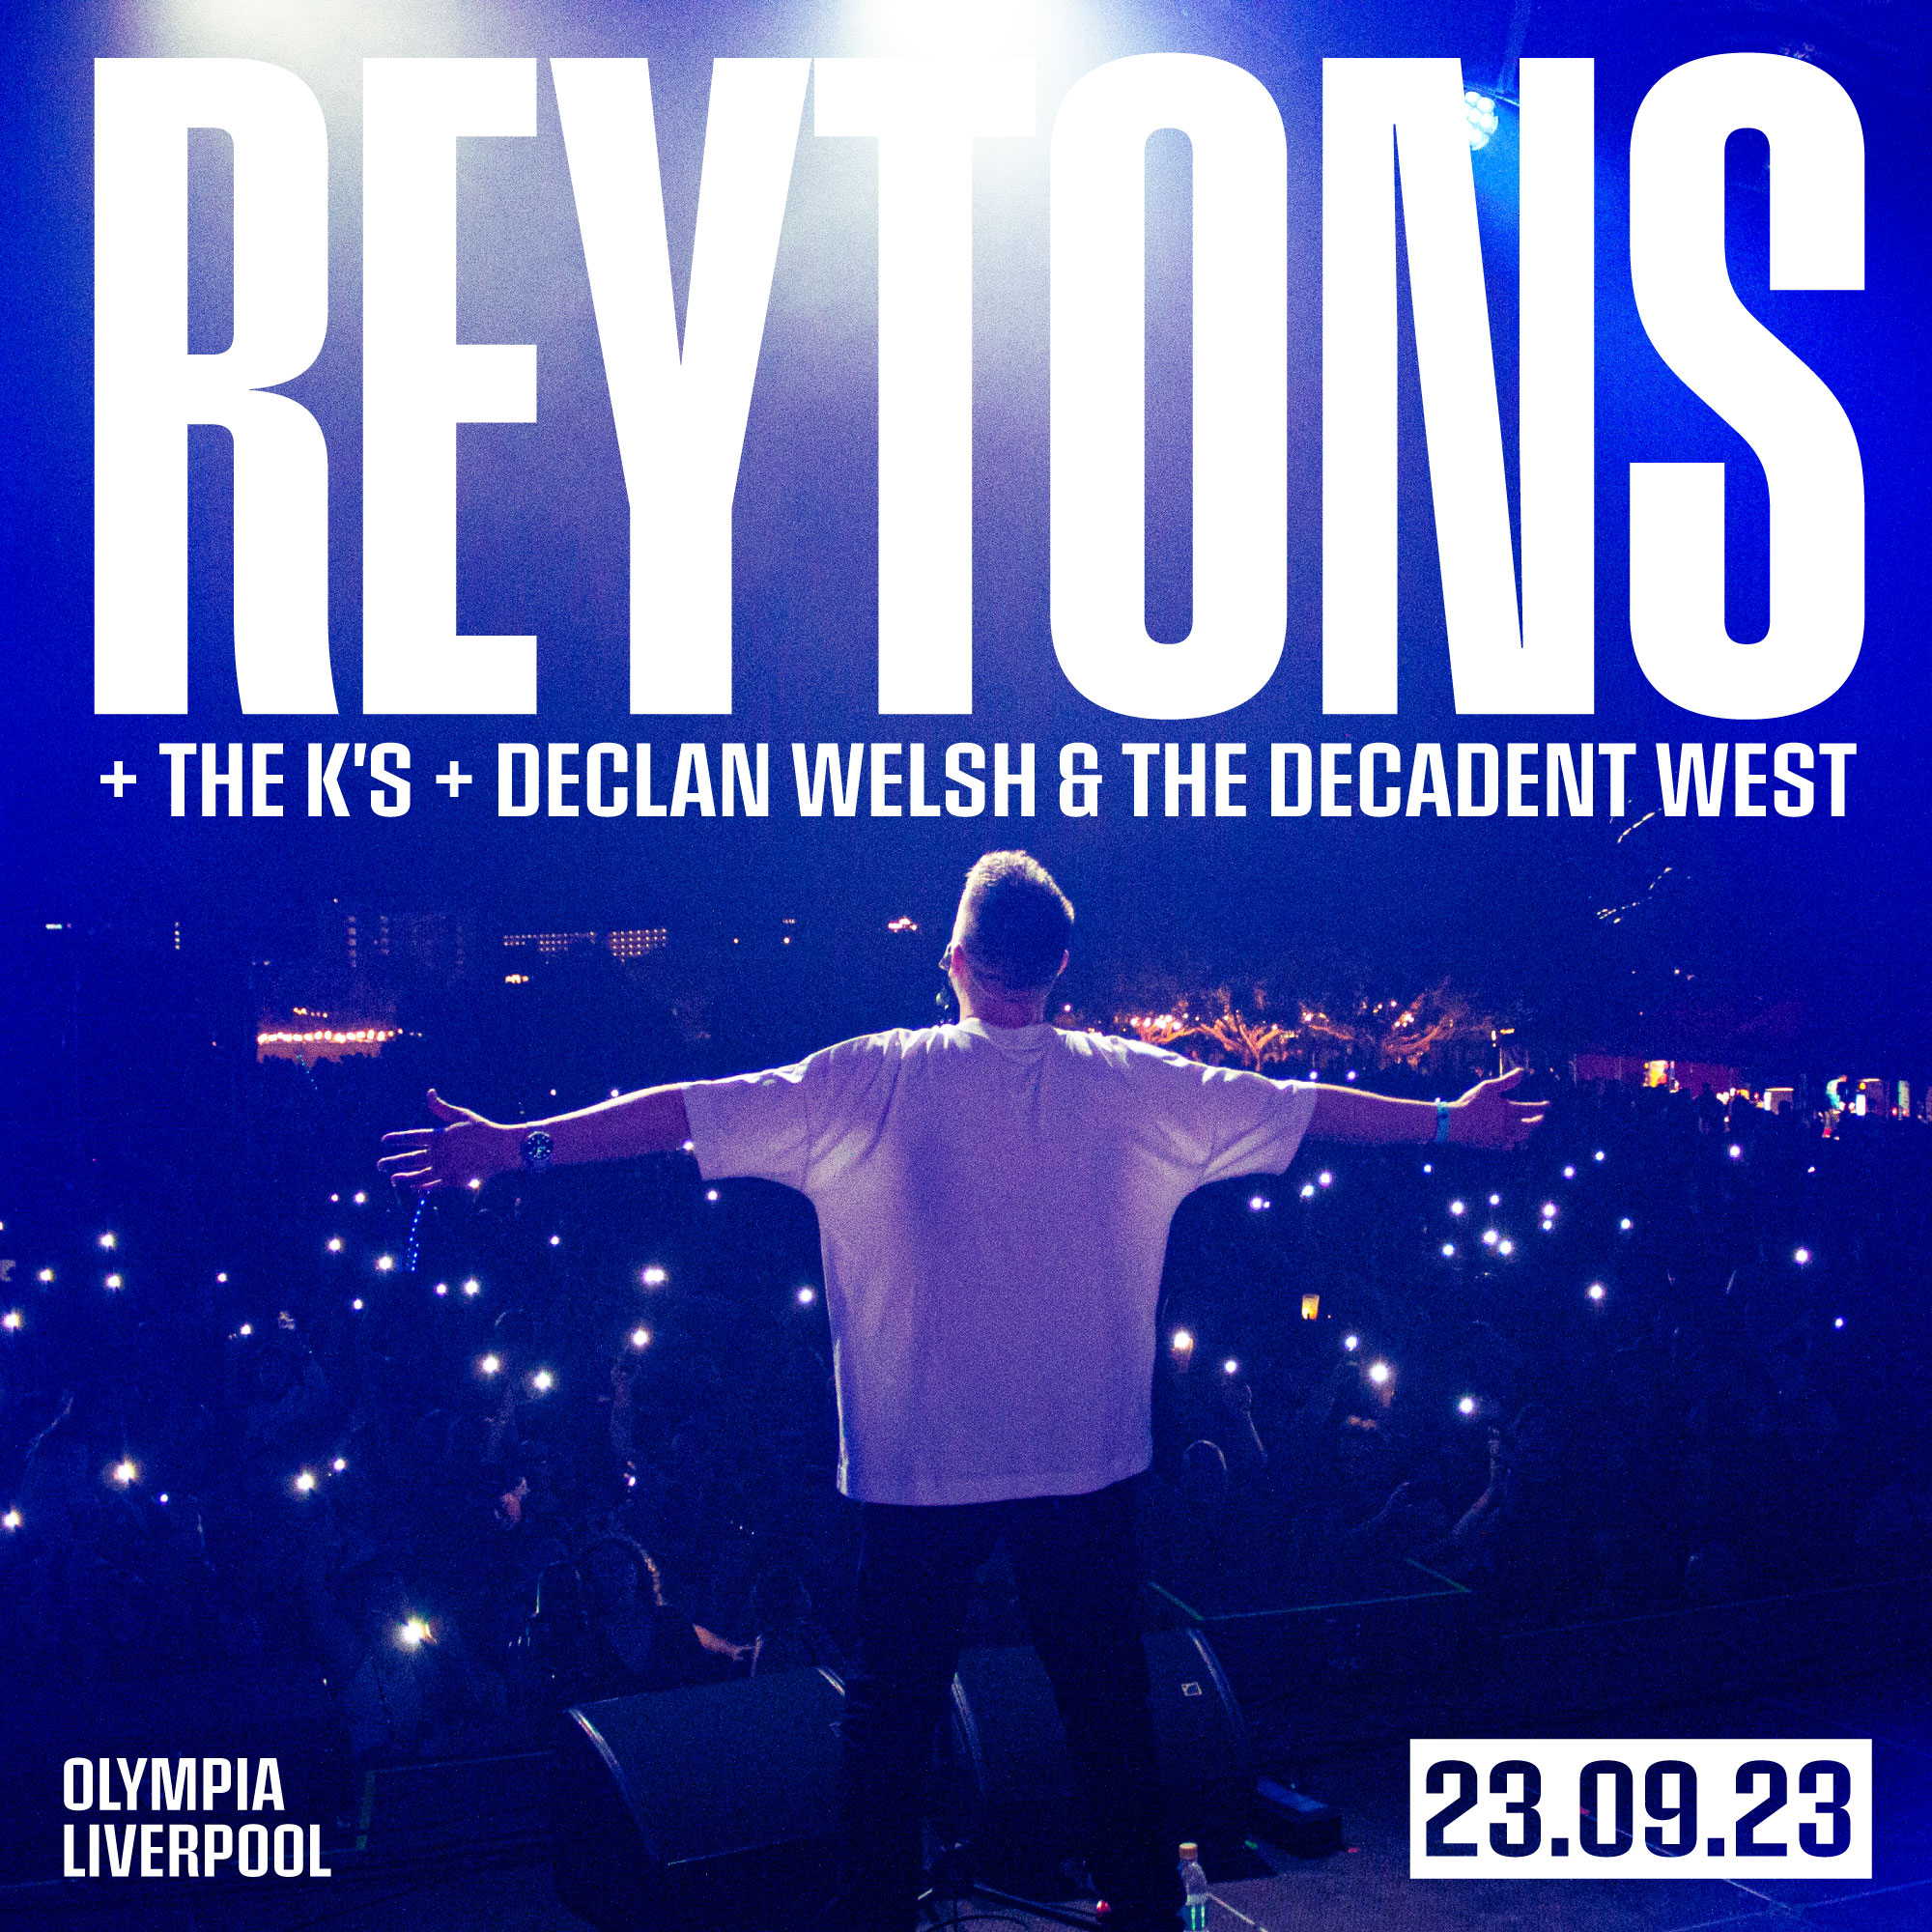 The Reytons + The K's + Declan Welsh & The Decadent West